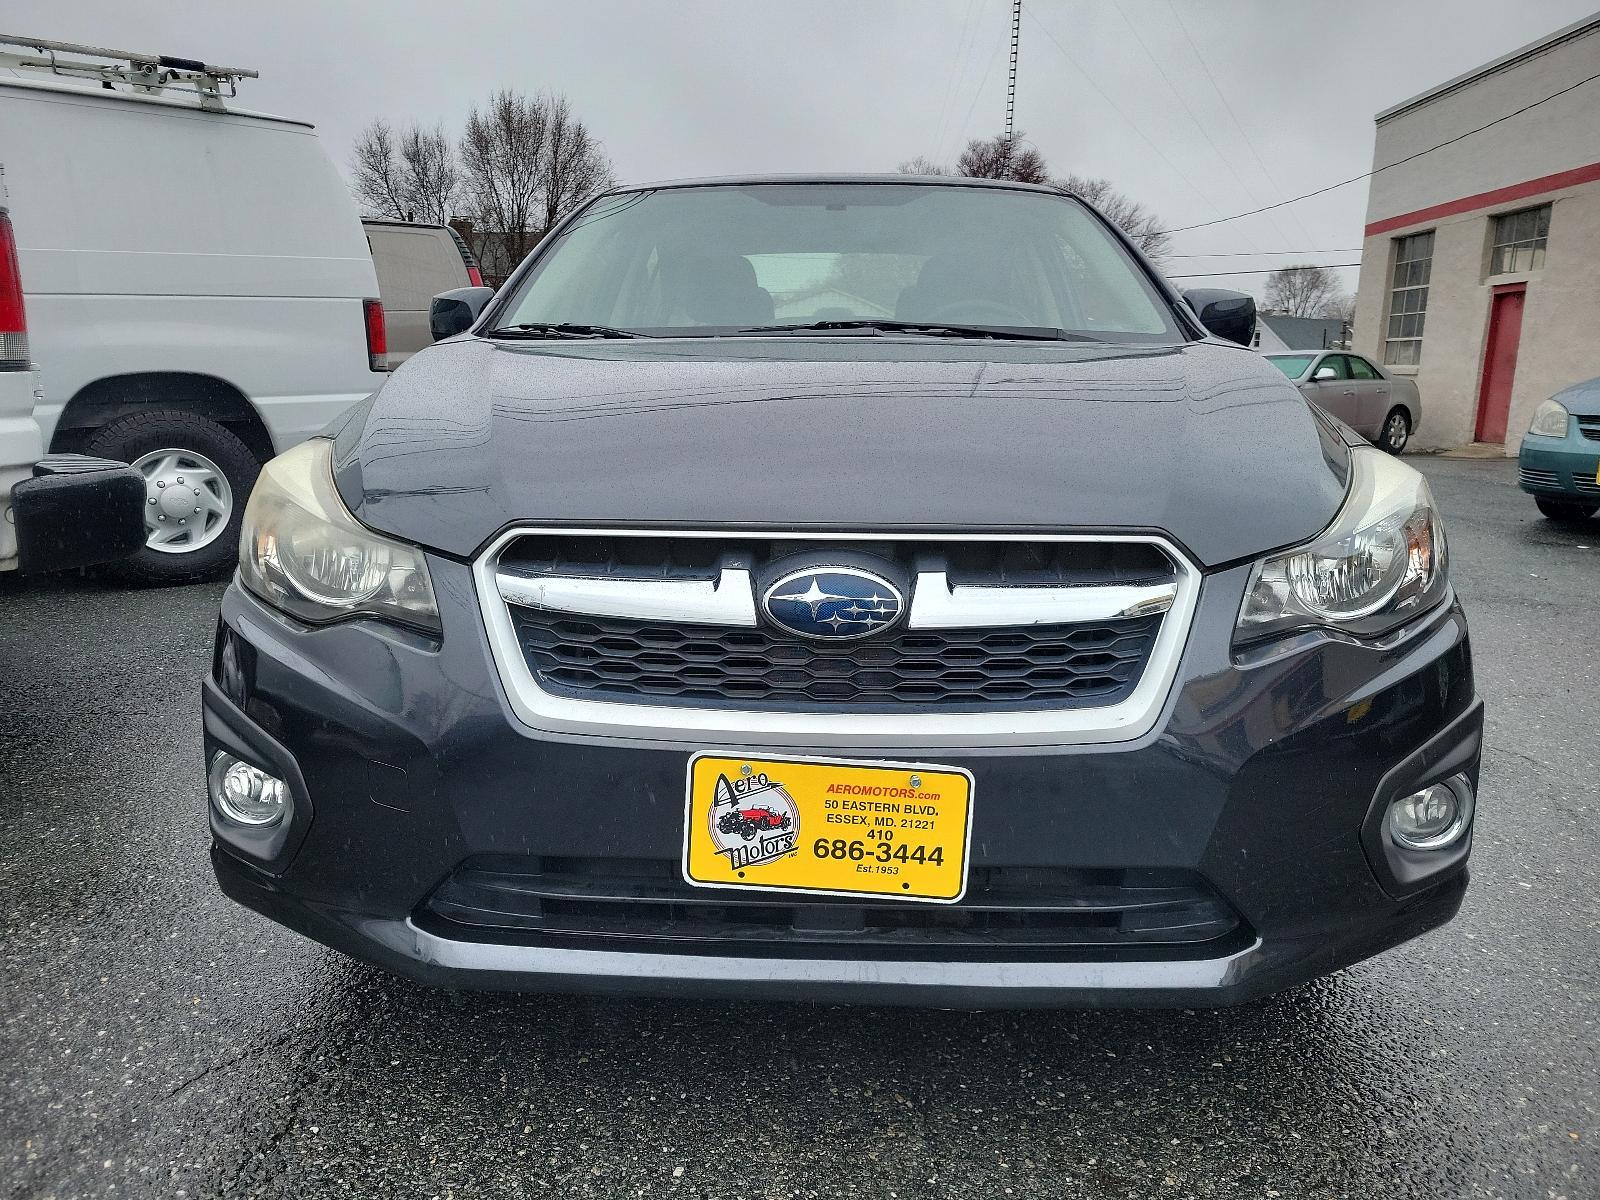 2014 Dark Gray Metallic - DGM /Black - BT20 Subaru Impreza Sedan Premium (JF1GJAC60EH) with an Engine: 2.0L DOHC 16V 4-Cylinder SMFI -inc: Electronic Throttle Control (ETC) engine, located at 50 Eastern Blvd., Essex, MD, 21221, (410) 686-3444, 39.304367, -76.484947 - Discover the thrill of driving in this sleek 2014 Subaru Impreza Sedan Premium, elegantly presented in a dark gray metallic exterior with a pristine black interior. This four-door marvel boasts a robust 2.0L DOHC 16V 4-Cylinder SMFI engine, designed with advanced electronic throttle control (ETC) to - Photo #1